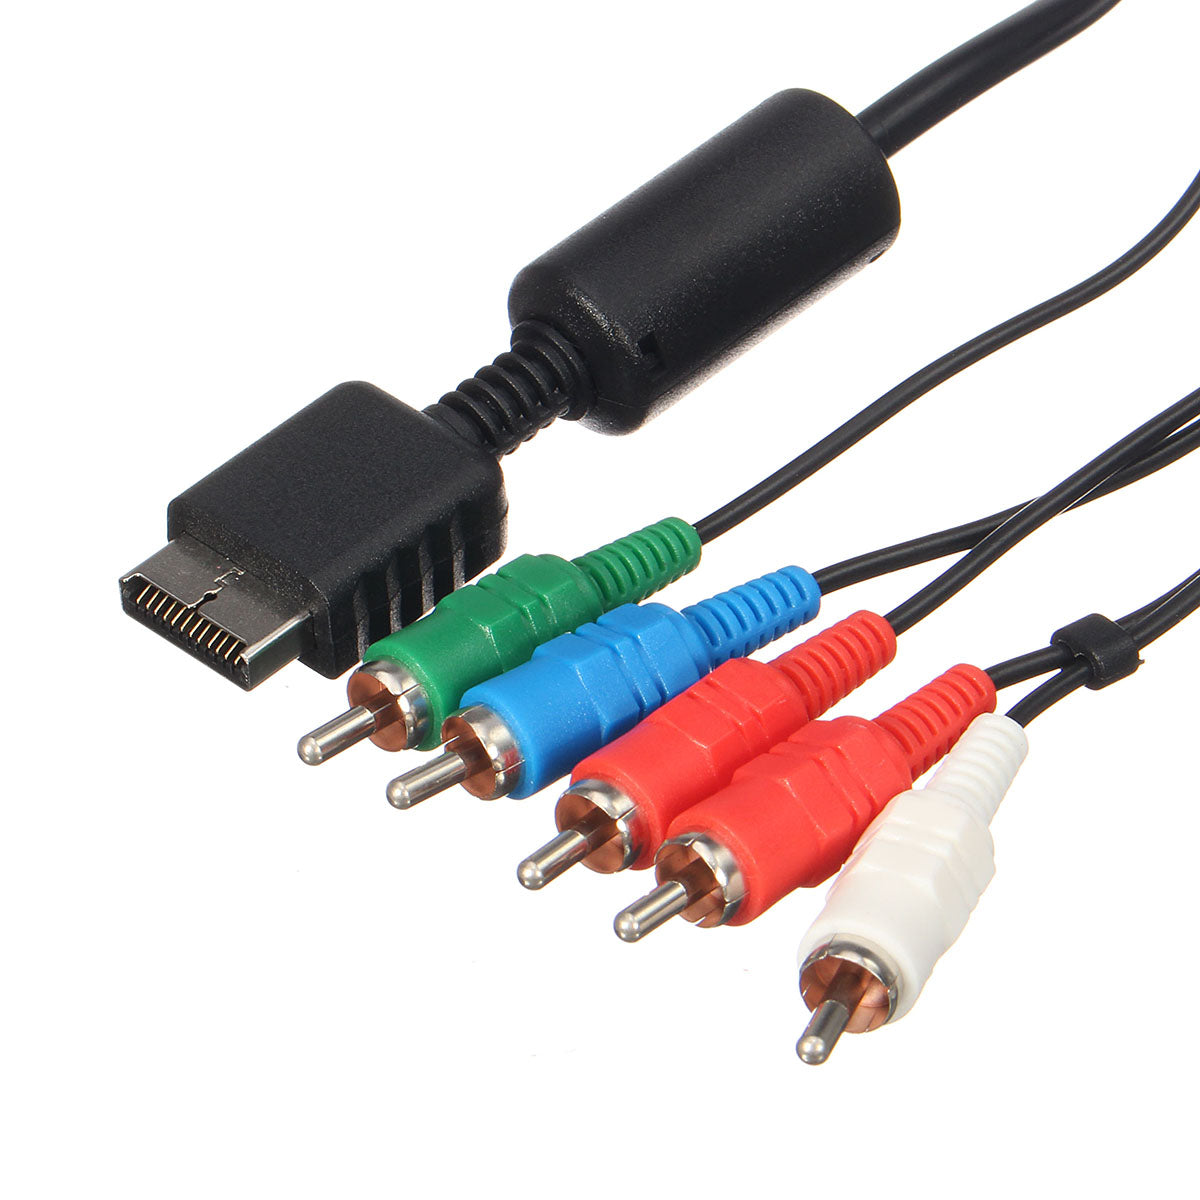 HD Component RCA AV Video-Audio Cable Cord for SONY for Playstation 2 3 PS2 PS3 Slim